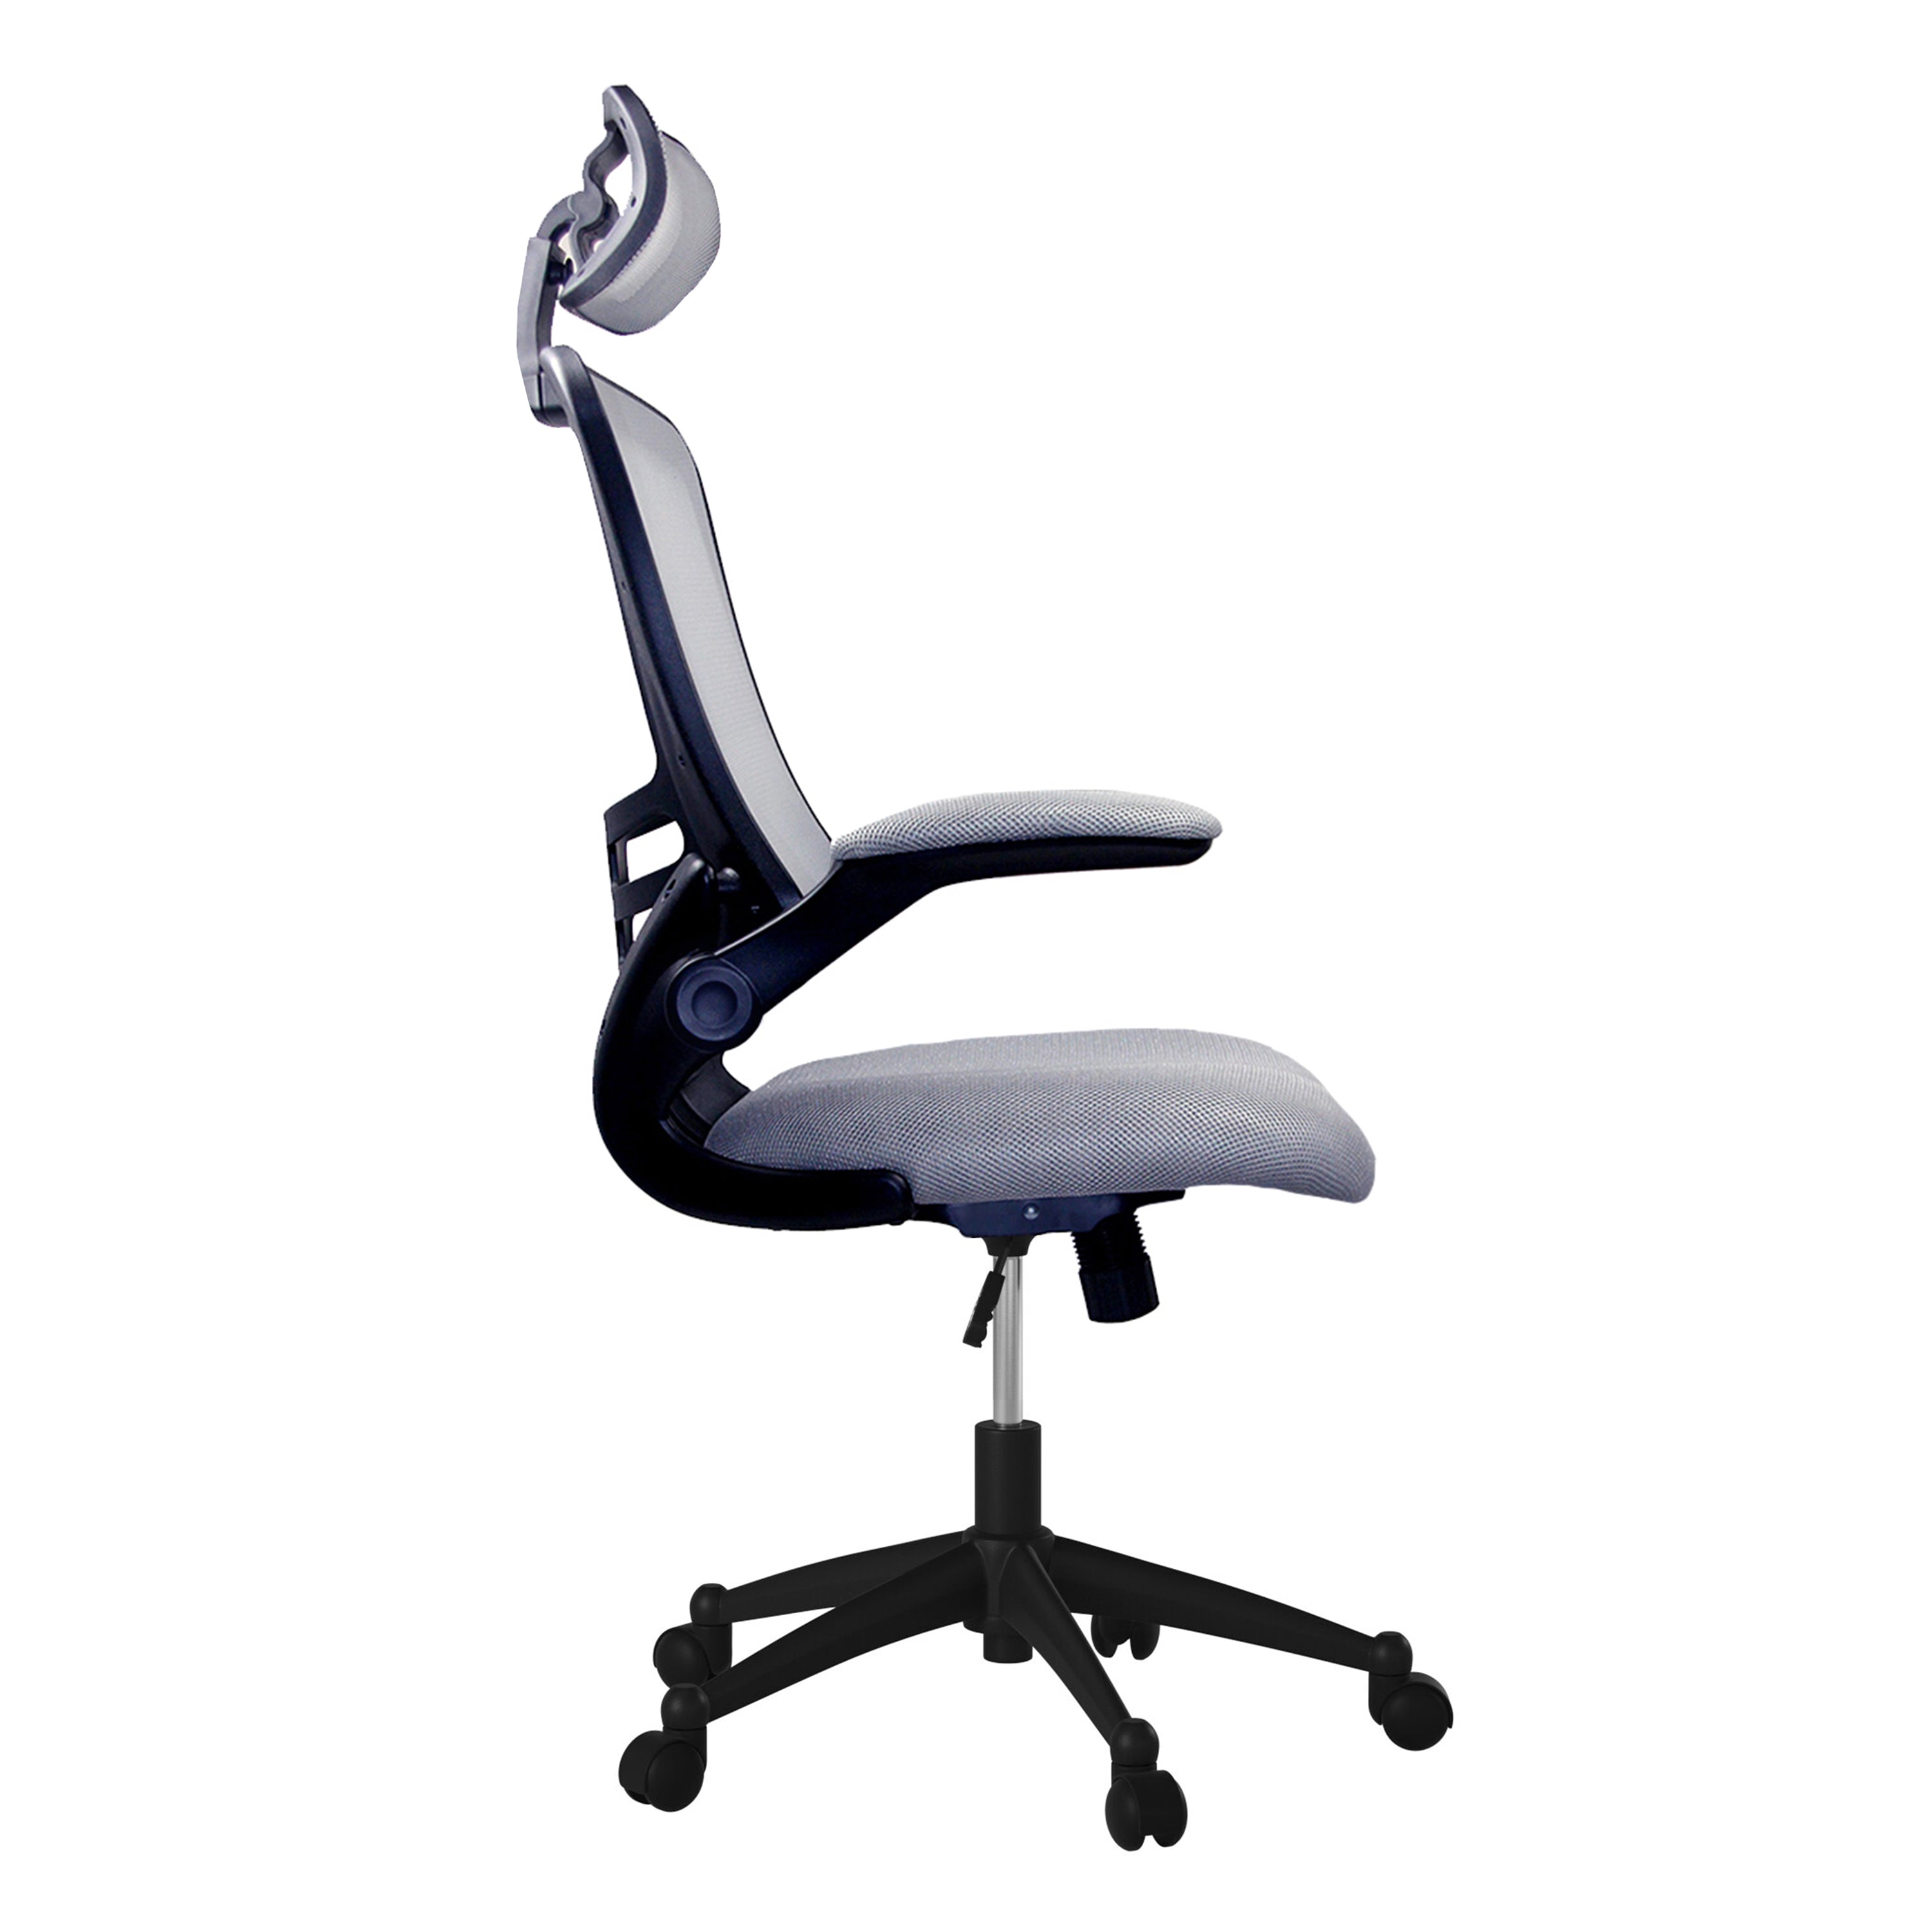 Modern High-Back Mesh Executive Office Chair With Headrest And